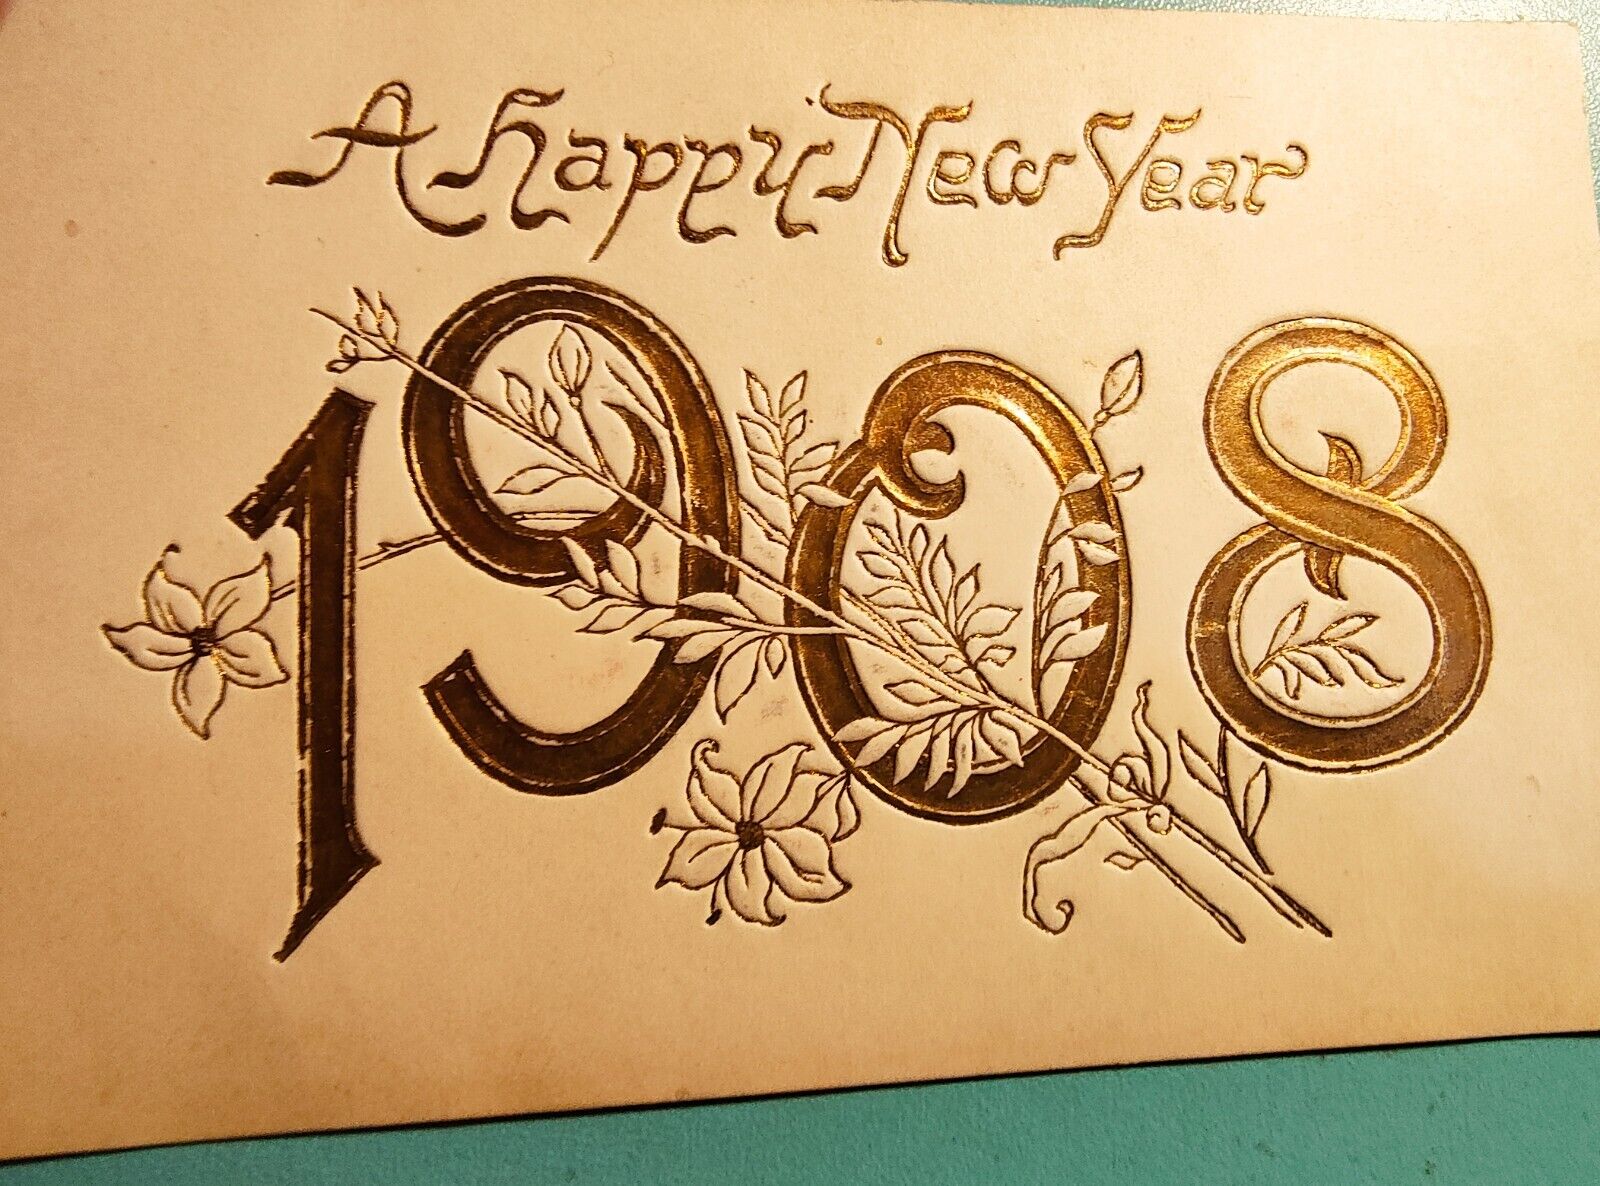 1908 ANTIQUE A HAPPY NEW YEAR POSTCARD, GERMANY